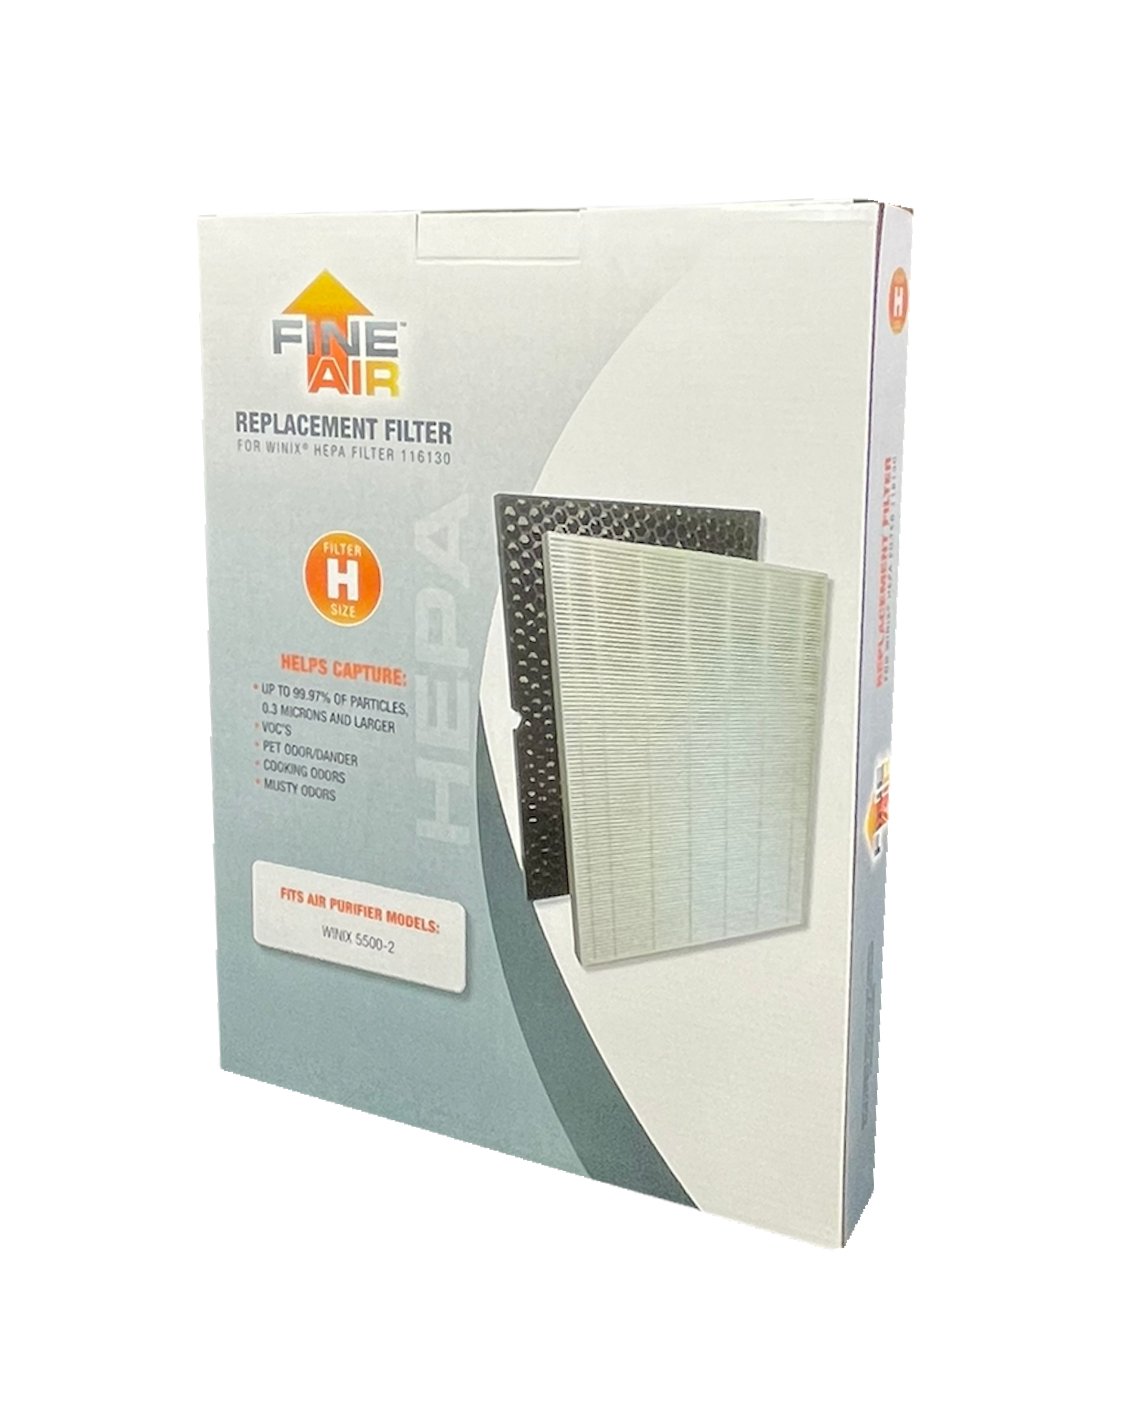 Atomic Compatible Replacement HEPA filter for Winix 116130